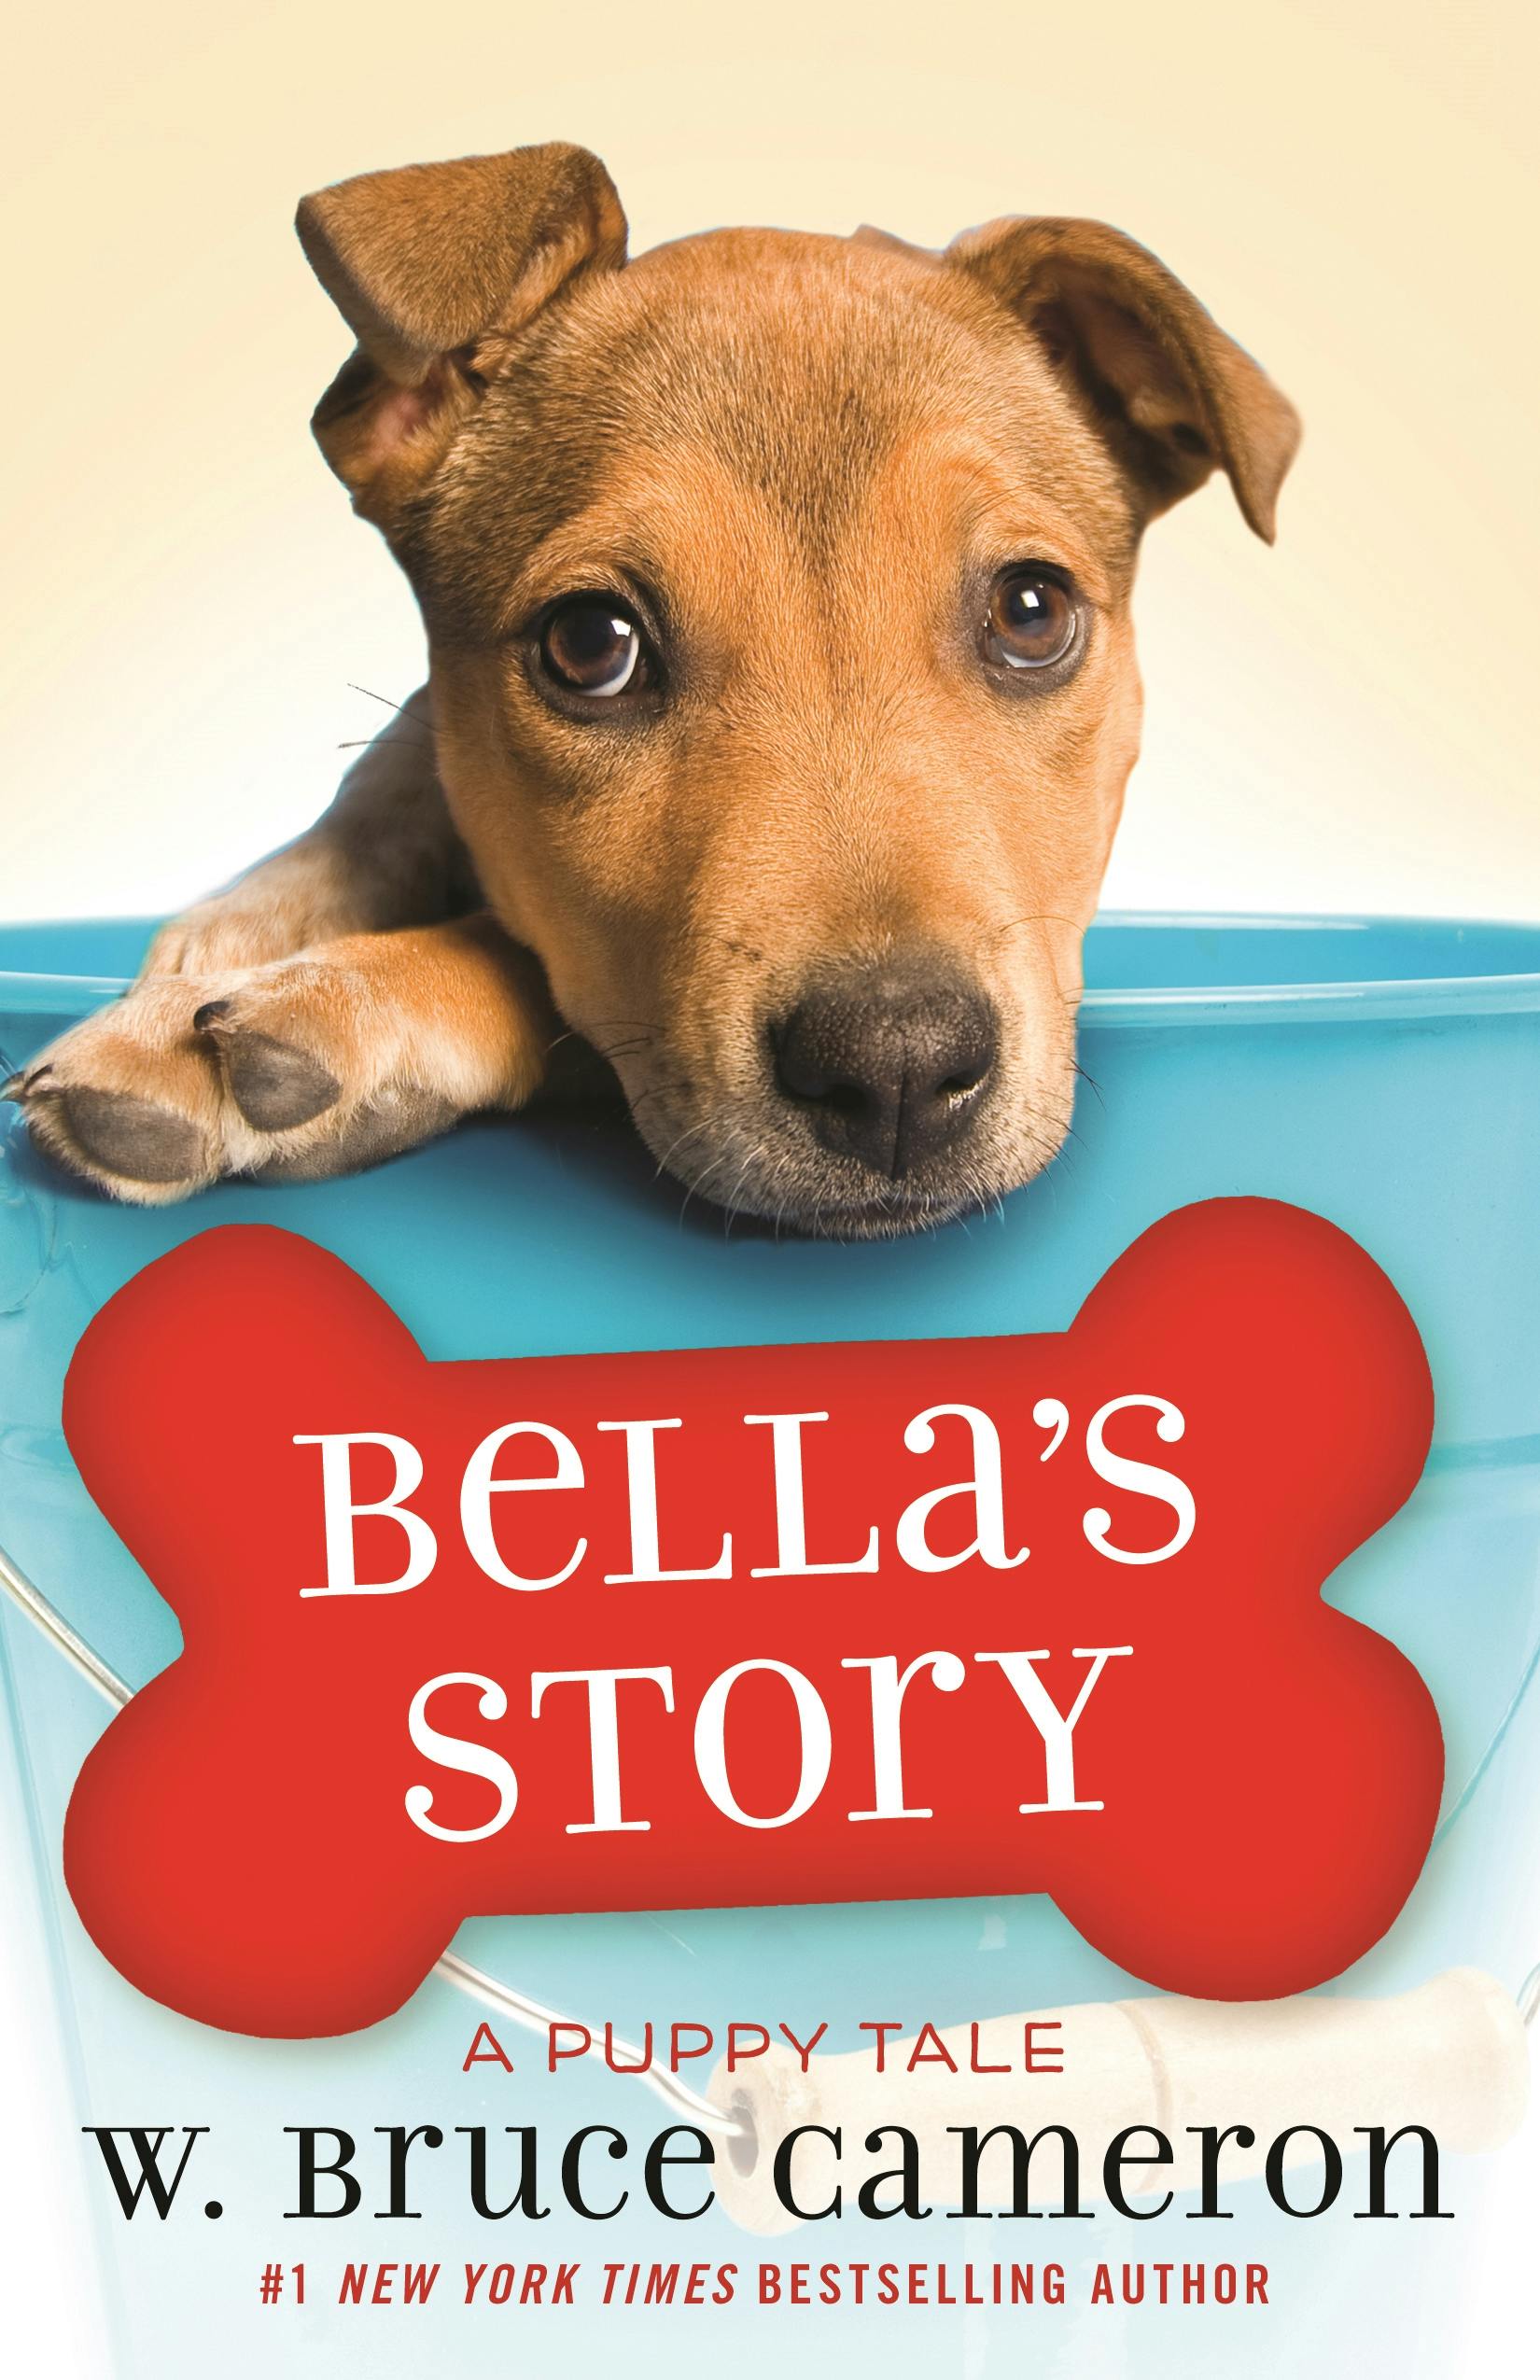 Image of Bella's Story